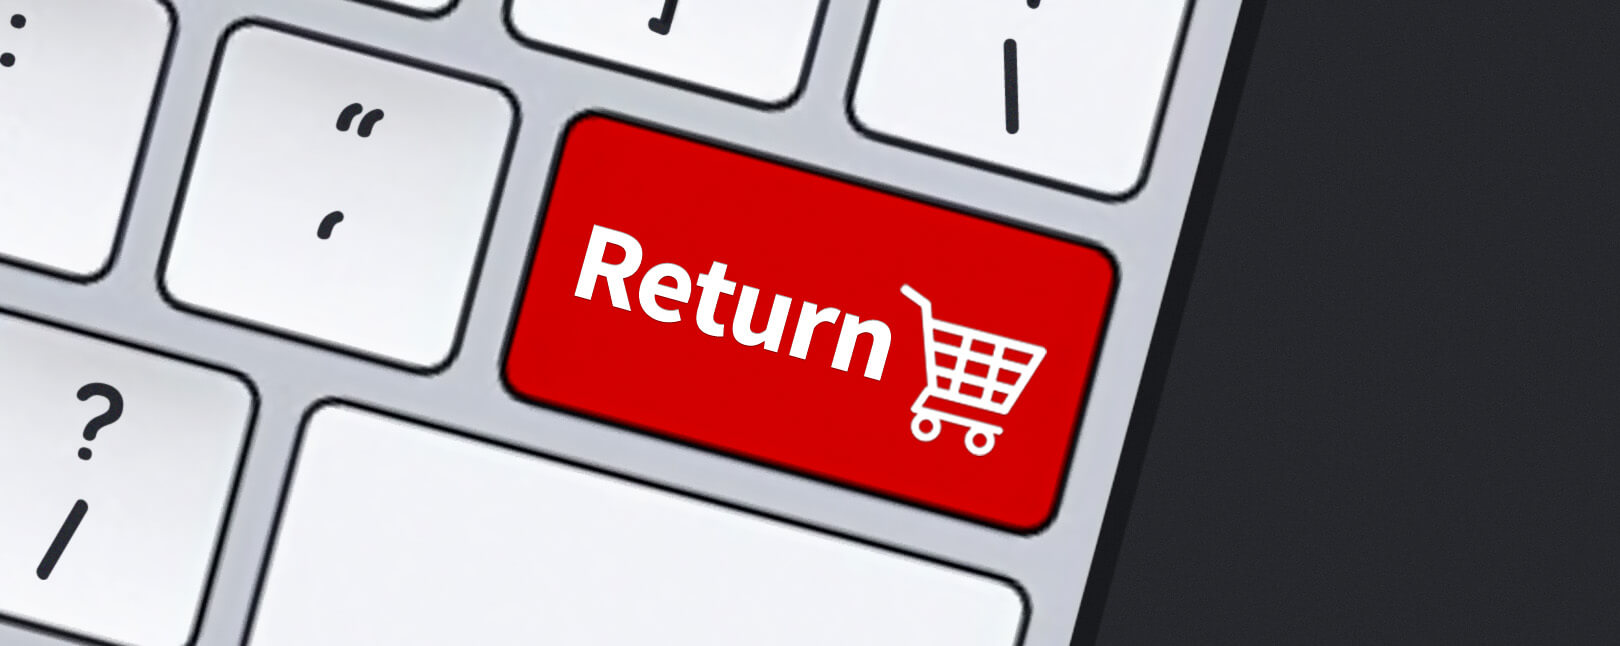 Accepted return. Product Returns картинка. Sales Return. The Return. Return product.